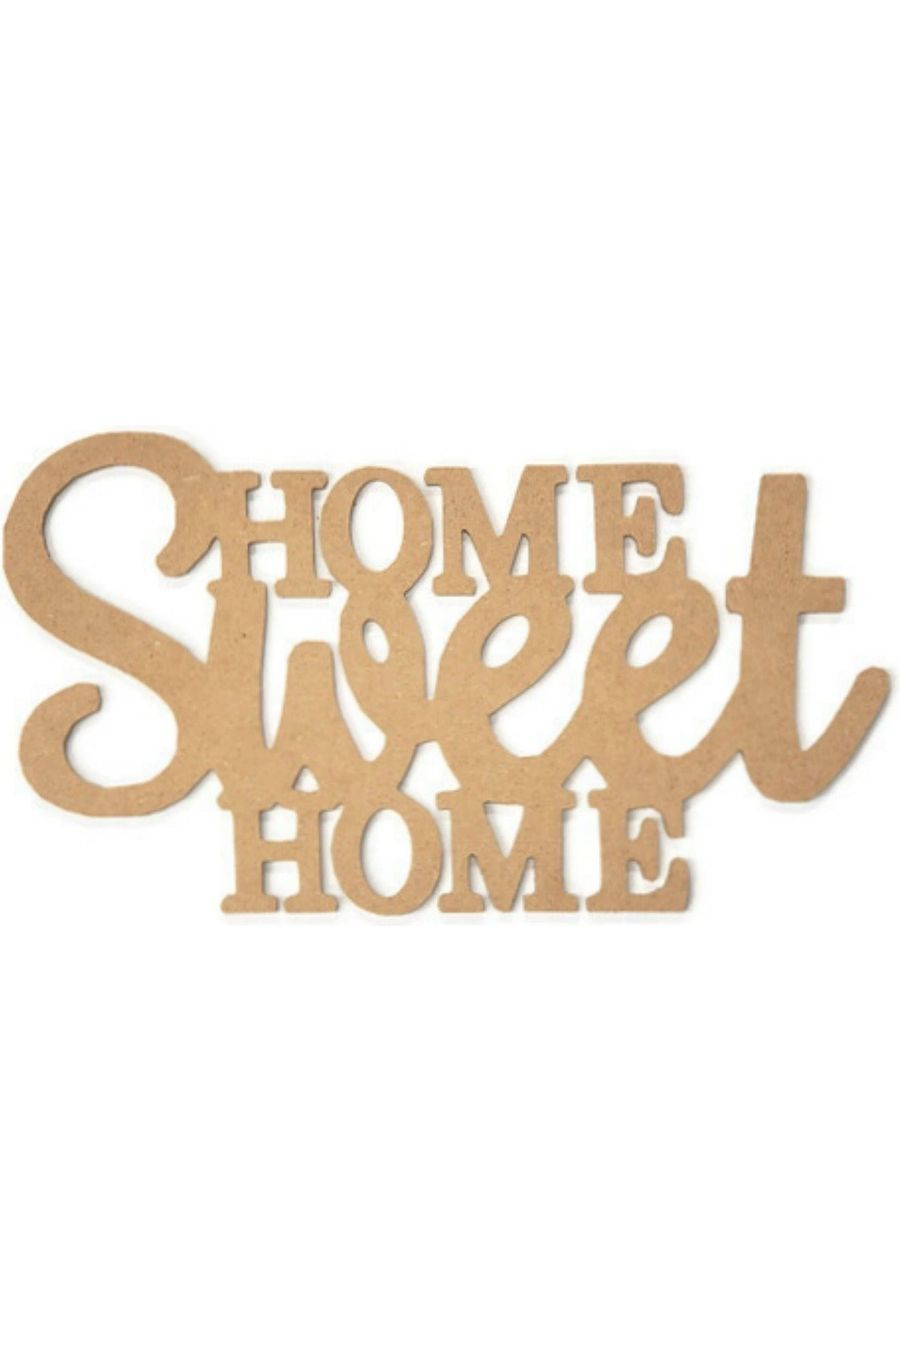 Shop For Home Sweet Home Word Wood Cutout - Unfinished Wood